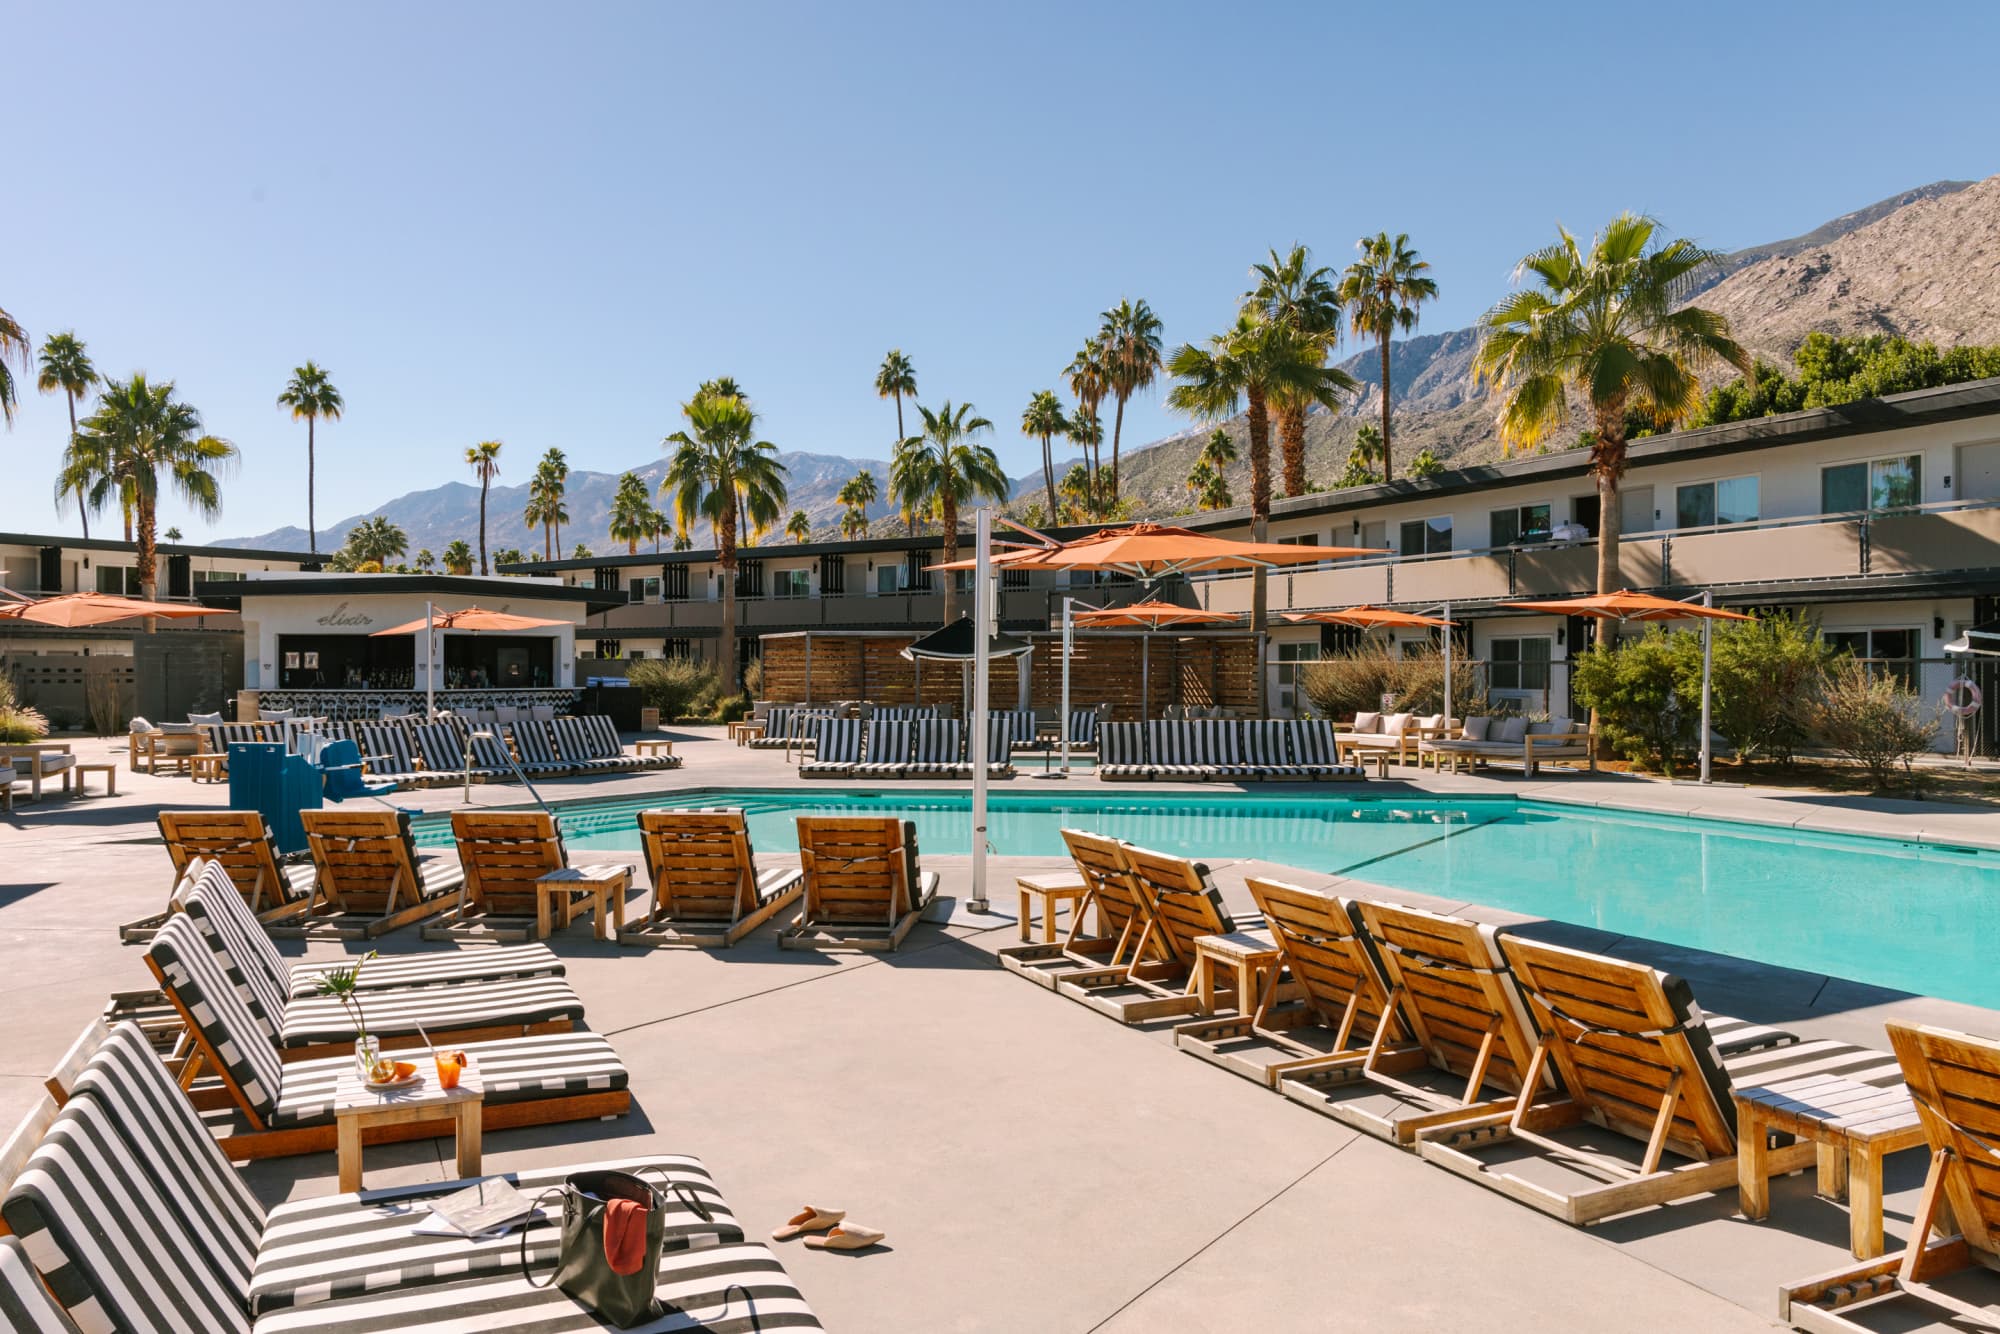 NEW PALM SPRINGS PM Slight Differences 